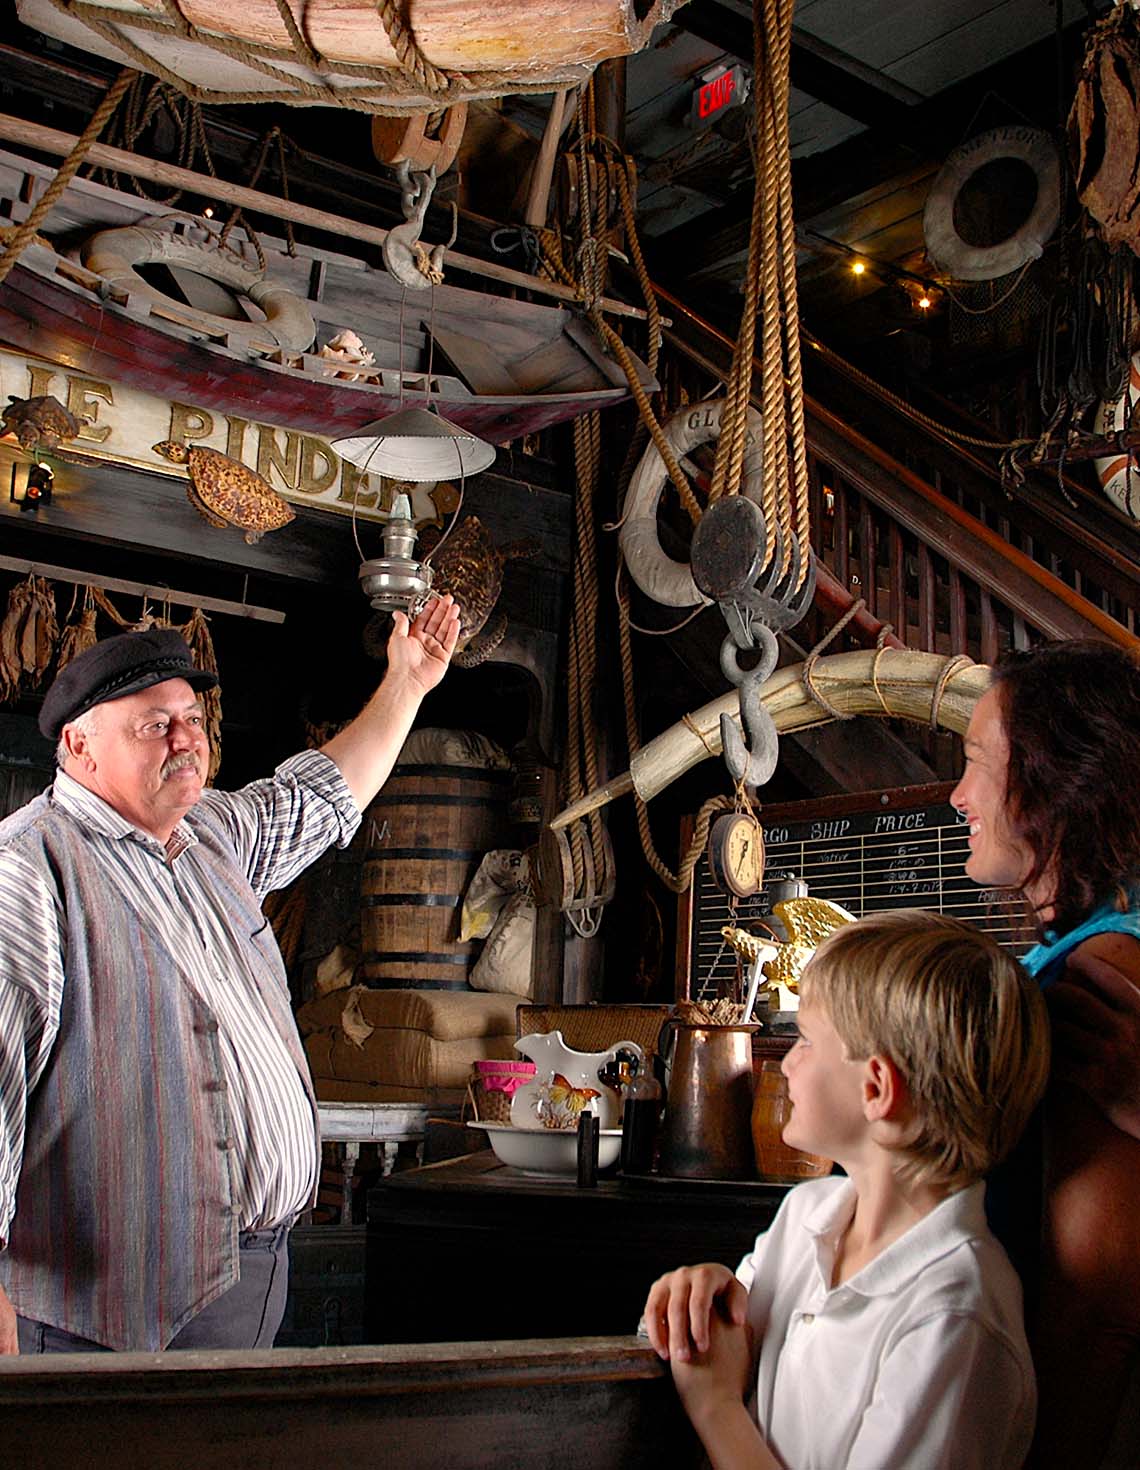 Tour guide and guests and Key West Shipwreck Treasure Museum